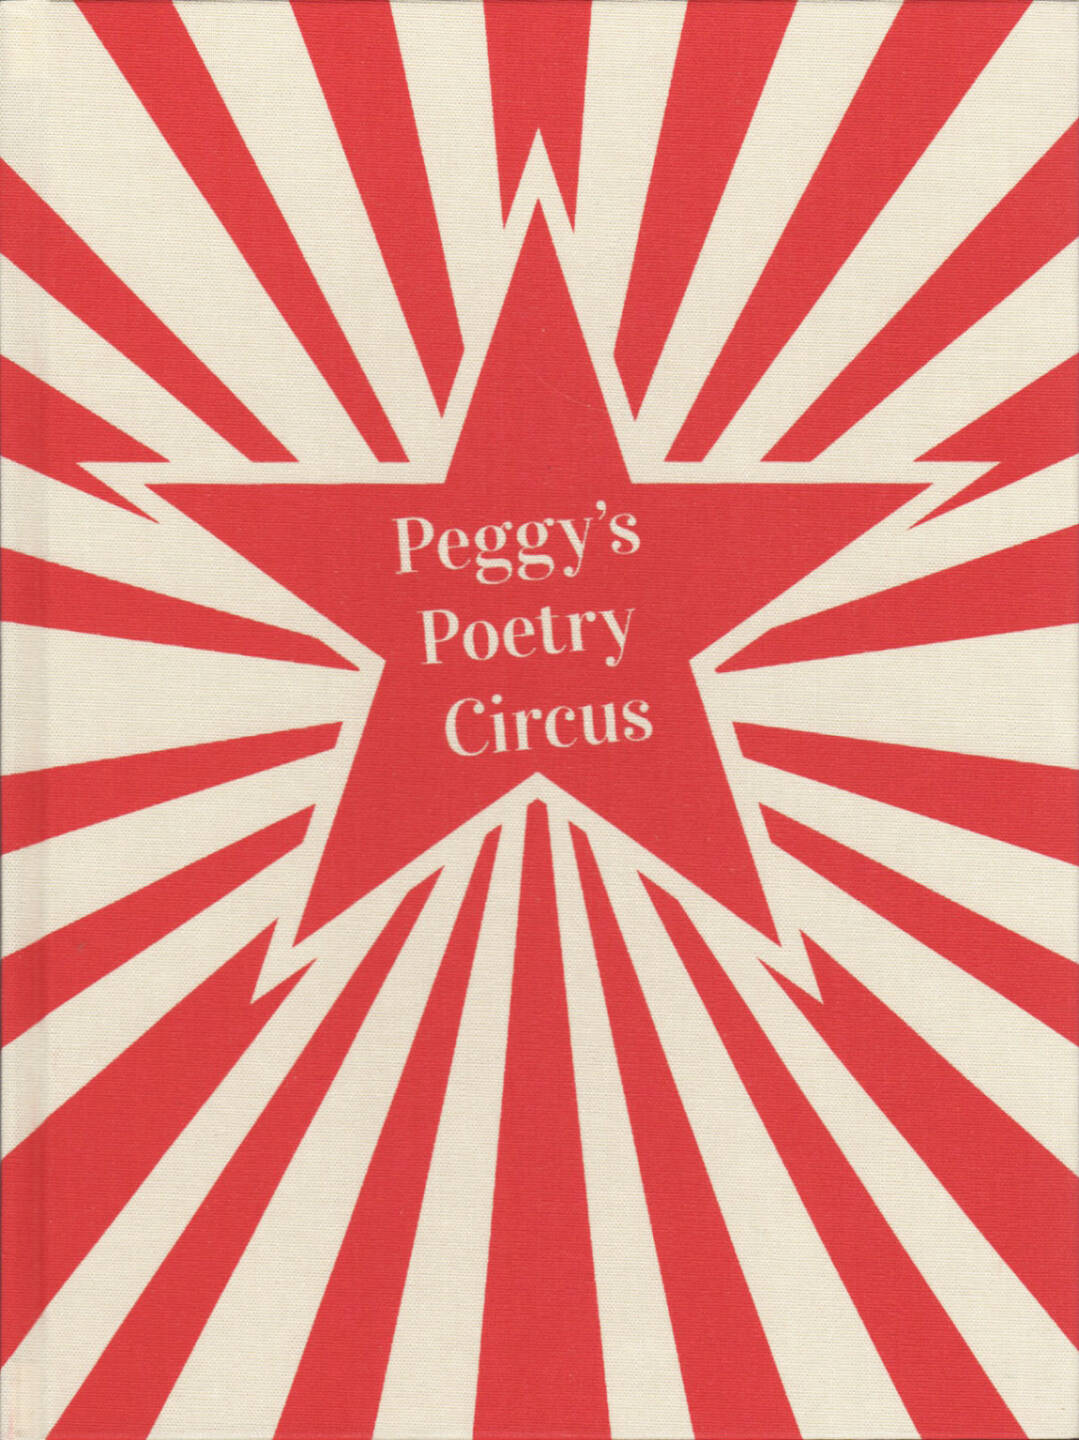 Petra Rautenstrauch - Peggy's Poetry Circus, Self published 2014, Cover - http://josefchladek.com/book/petra_rautenstrauch_-_peggys_poetry_circus